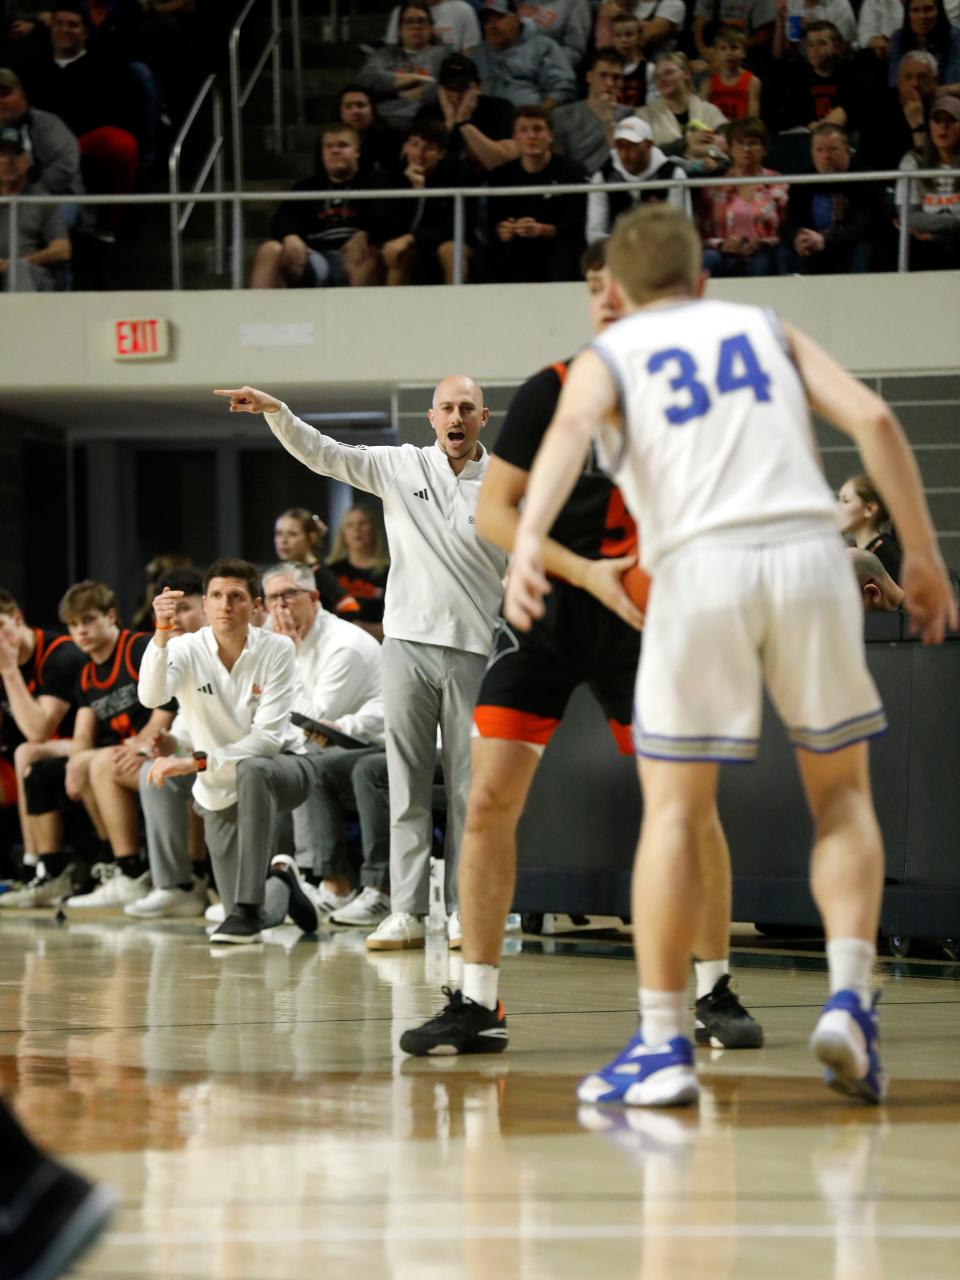 New Lex coach Jeremy Duerr calls out signals during a 54-46 overtime loss to VIncent Warren on Saturday in a Division II district final at the Ohio Convocation Center.